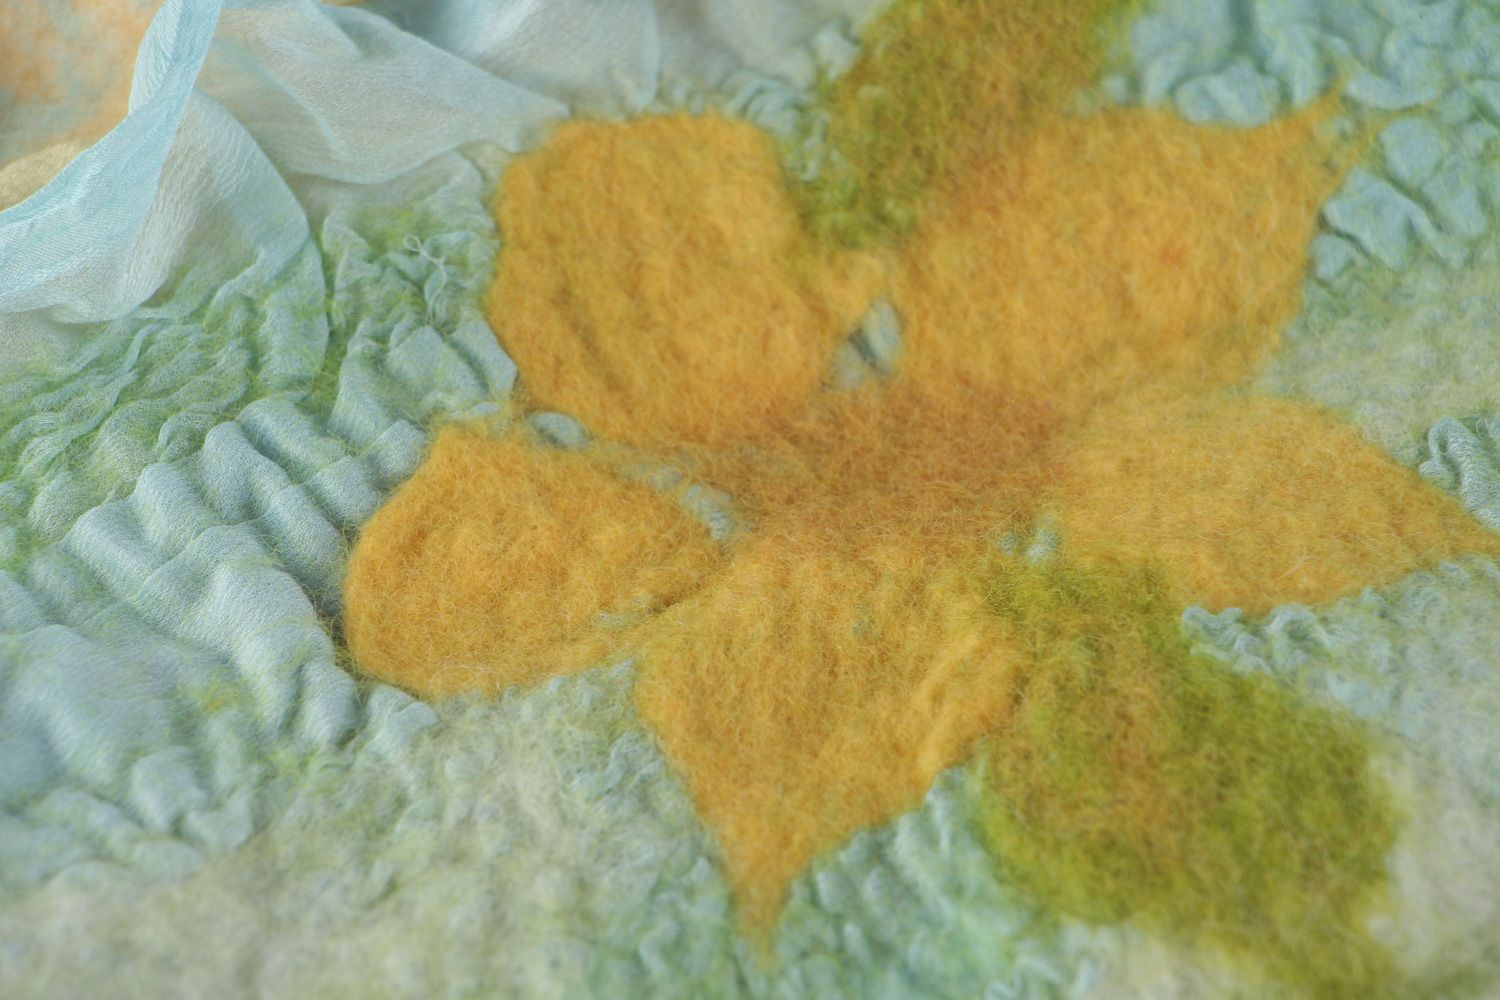 Tender handmade silk and chiffon scarf with felted wool flowers in light colors photo 3